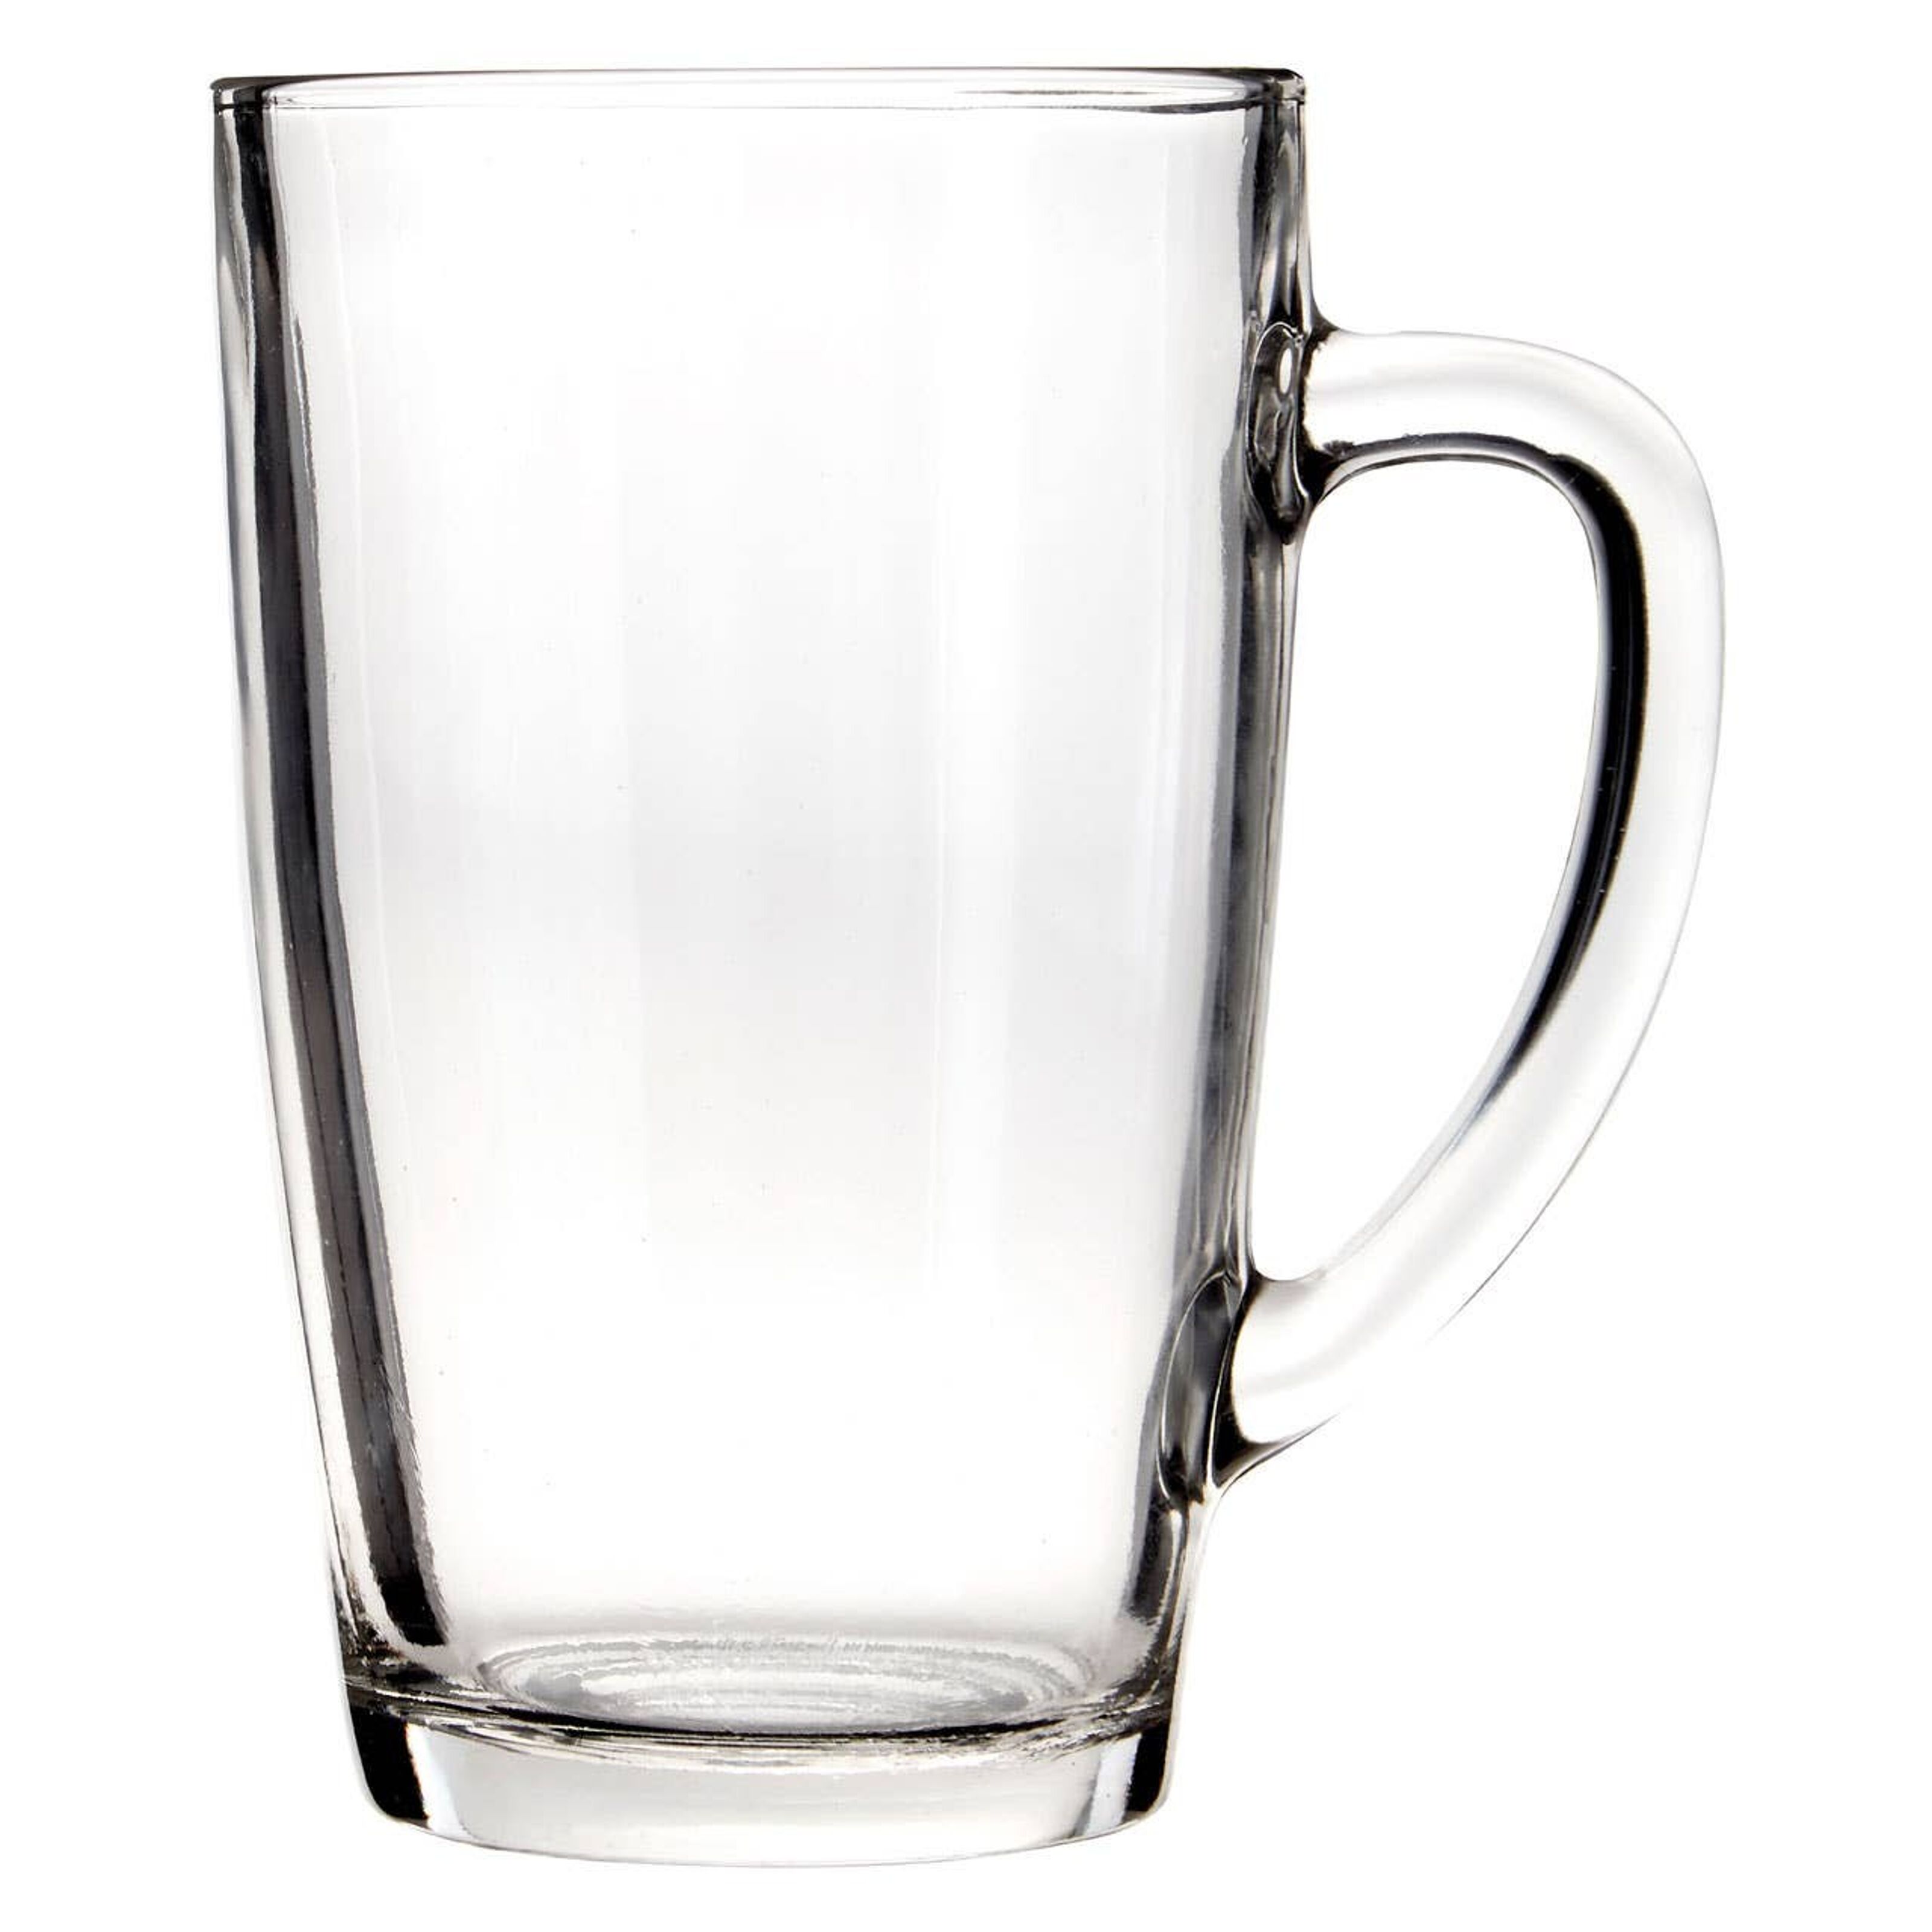 Buy wholesale Clear Tall Glass Mugs - Set of 4